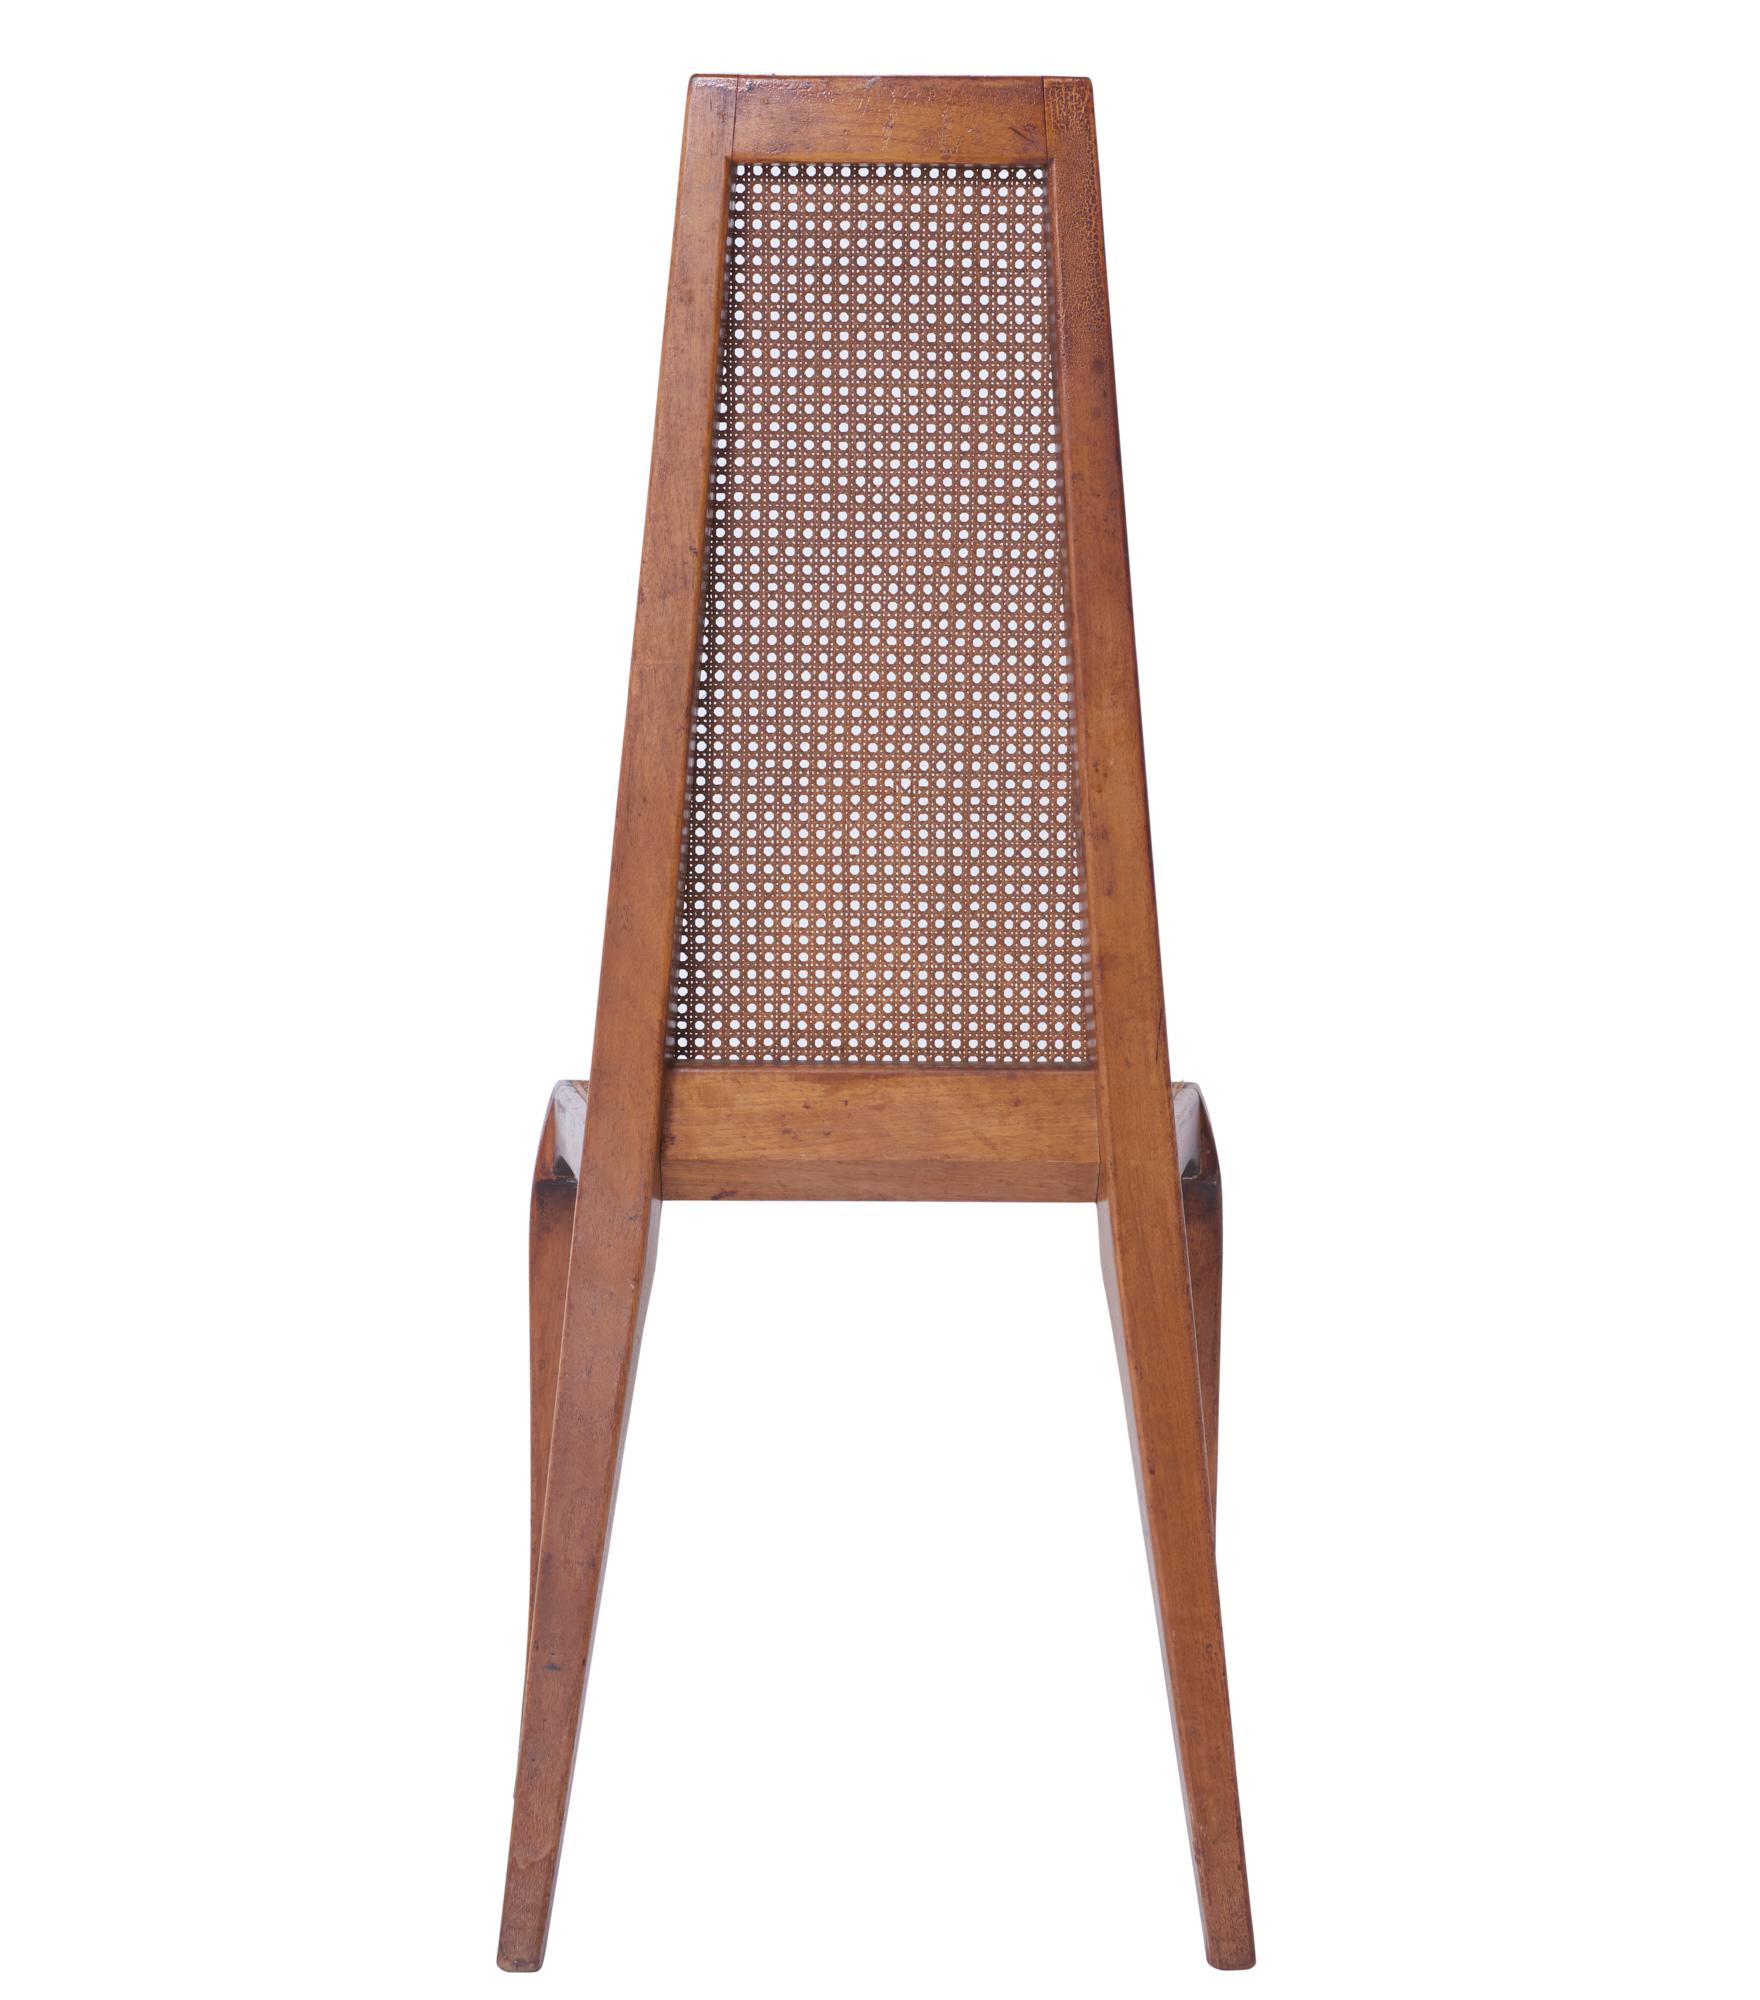 20th Century Pair of Mid-Century Modern Caned Chairs in Walnut, circa 1960